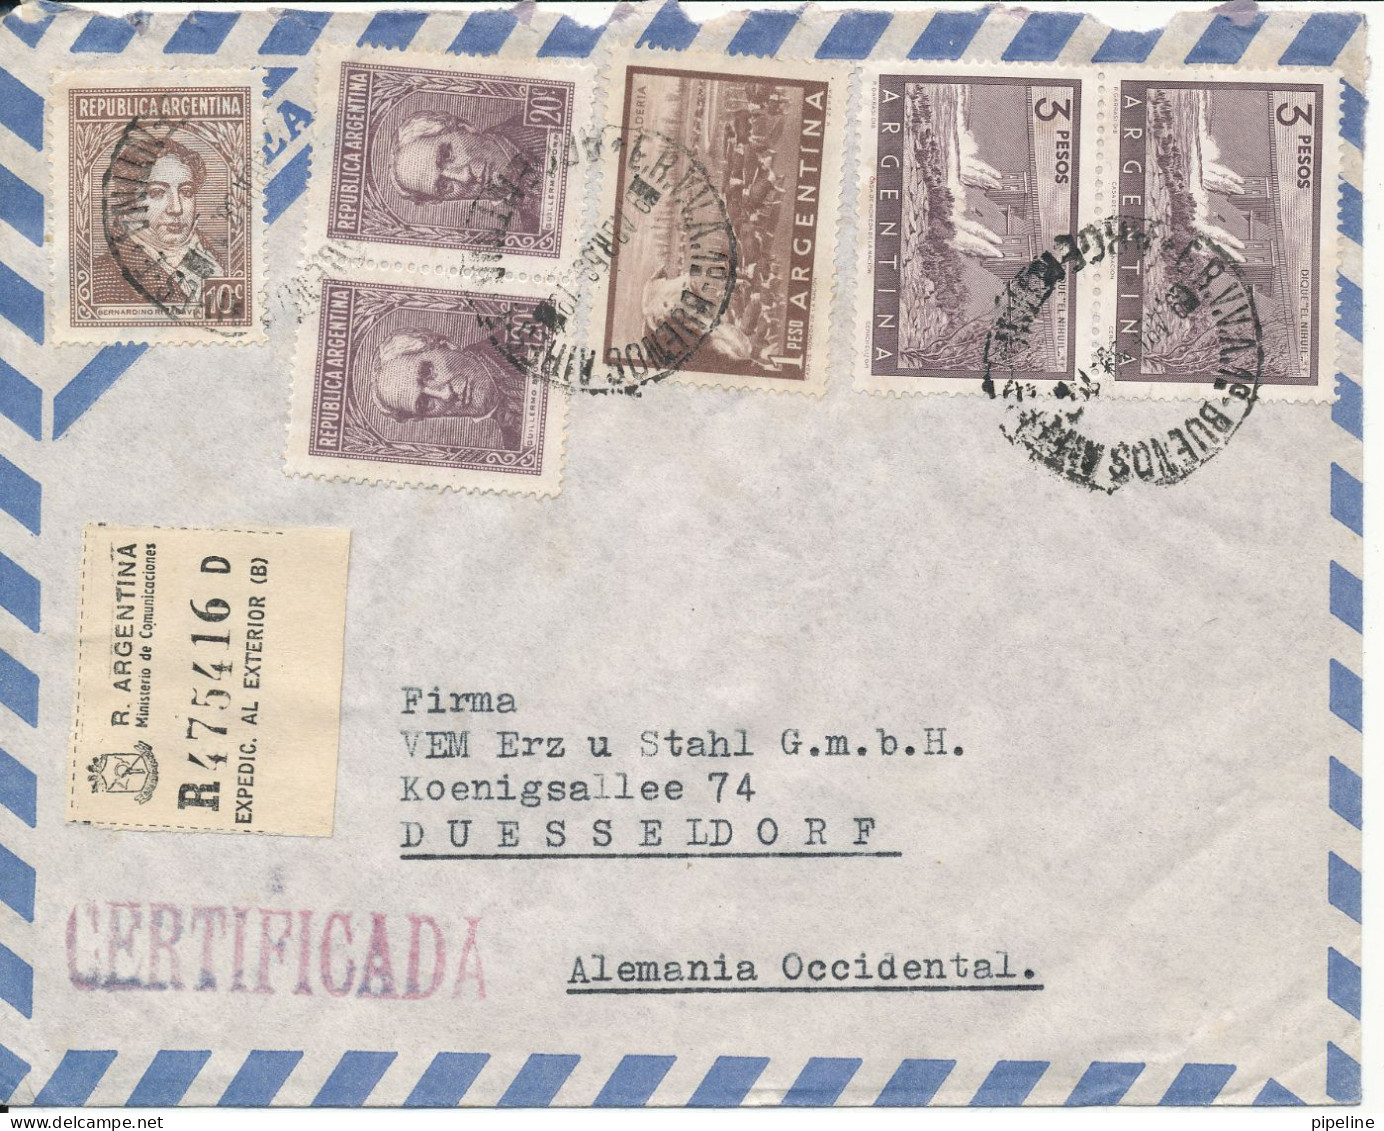 Argentina Registered Air Mail Cover Sent To Germany 9-4-1956 With More Stamps - Luchtpost